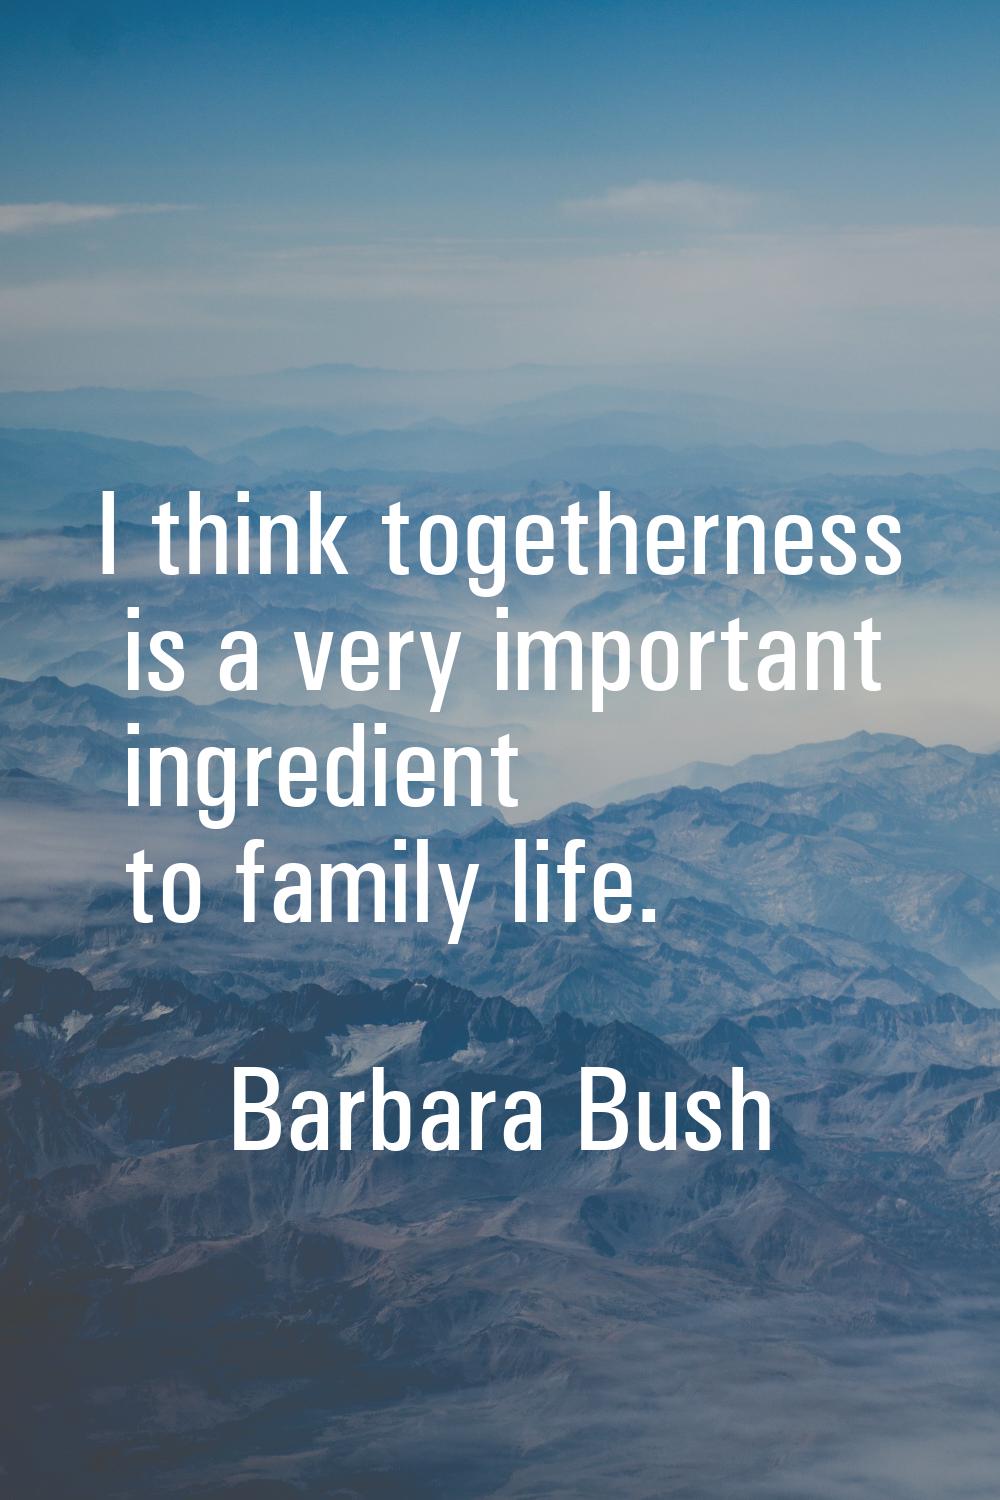 I think togetherness is a very important ingredient to family life.